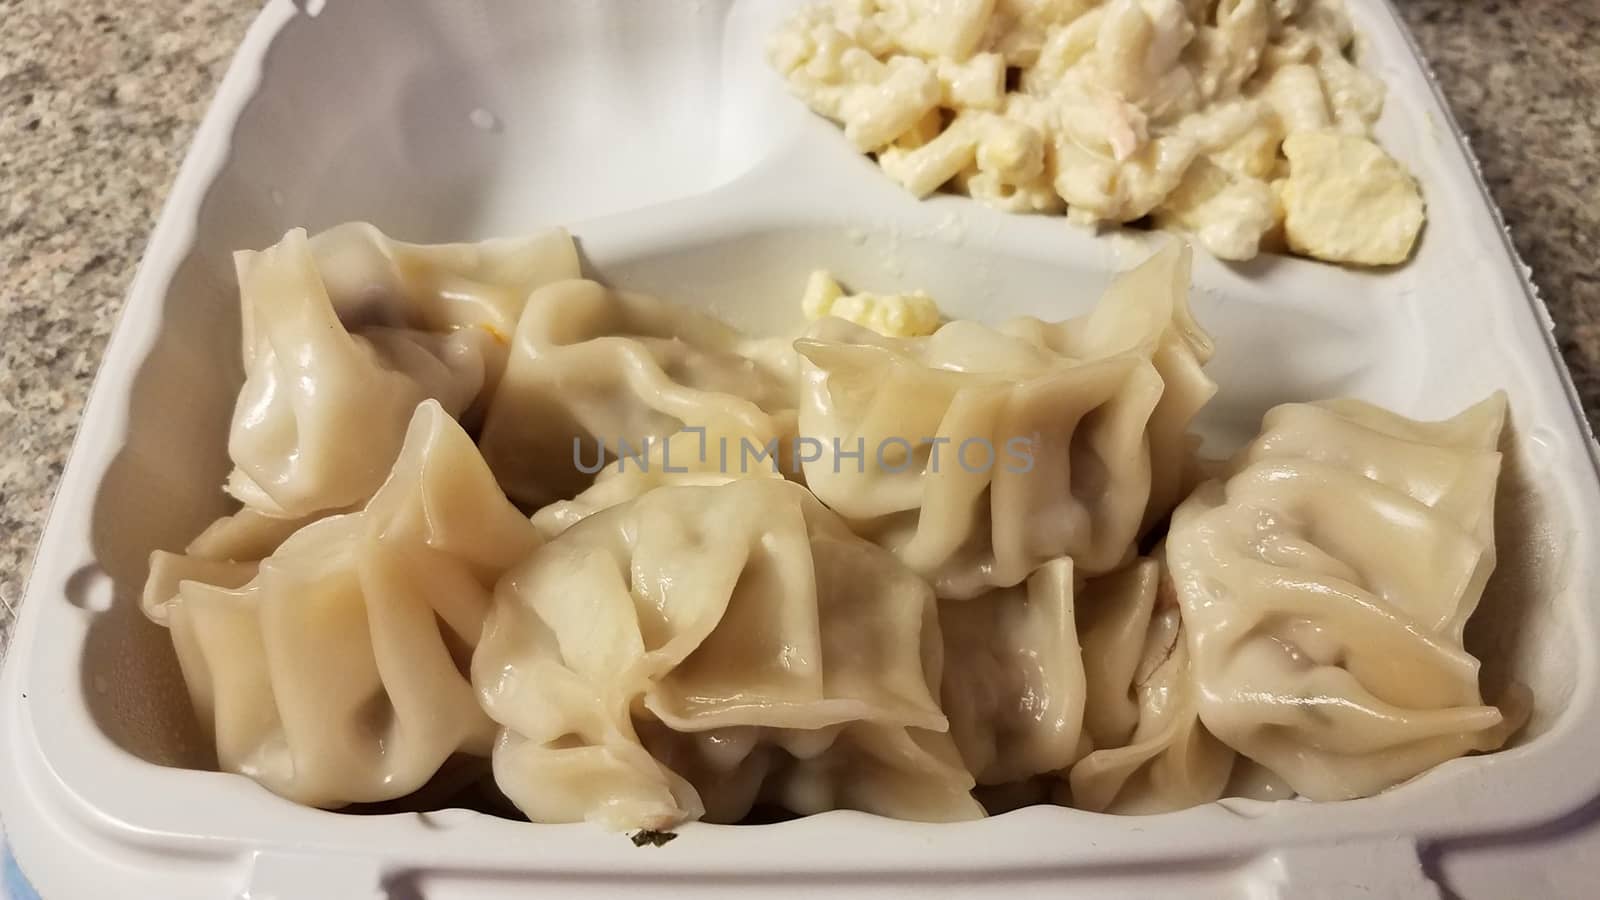 container of dumplings and macaroni salad on counter by stockphotofan1